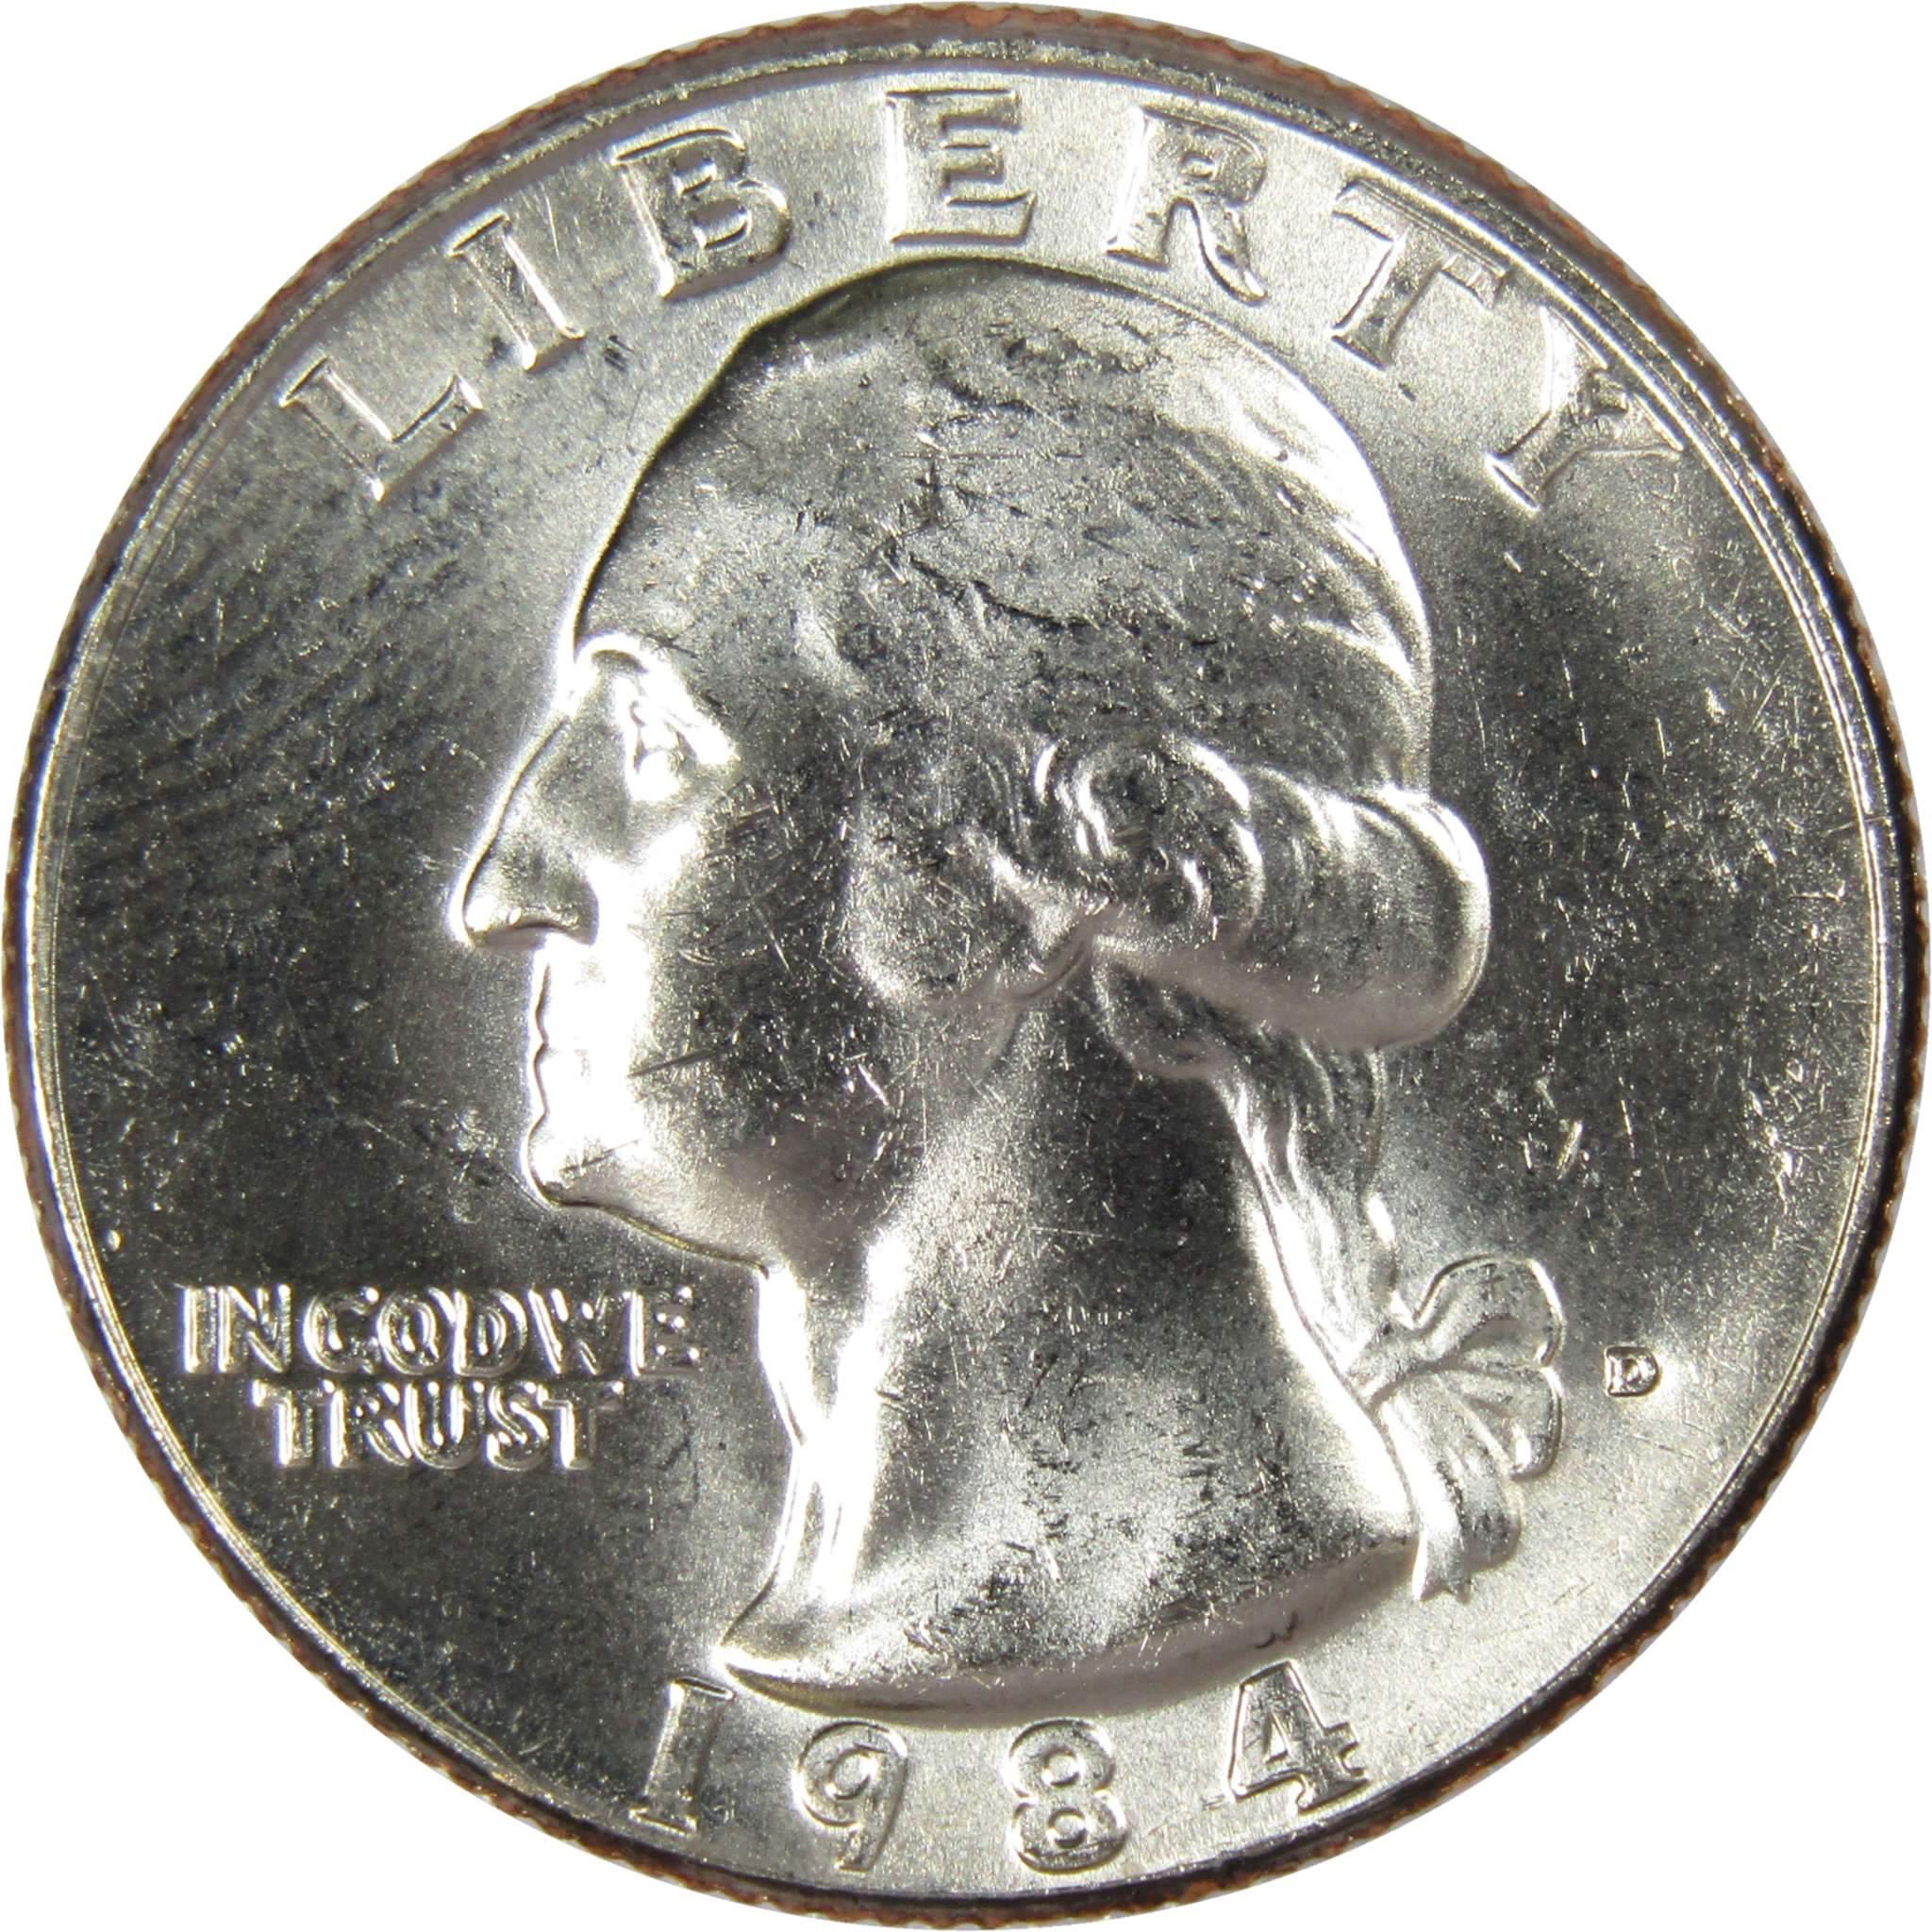 1984 D Washington Quarter BU Uncirculated Mint State 25c US Coin Collectible